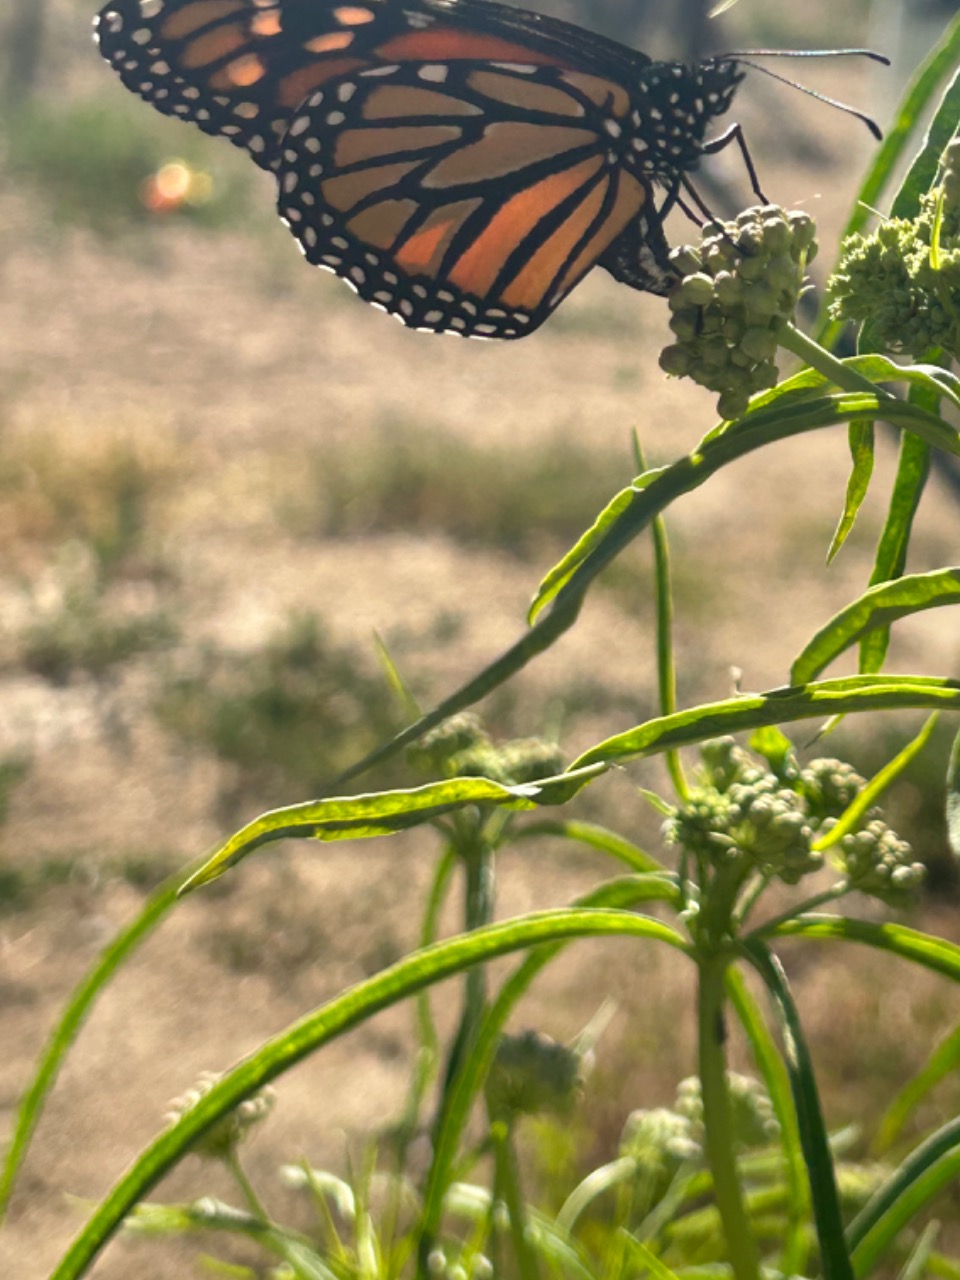 A monarch butterfly on a green plant